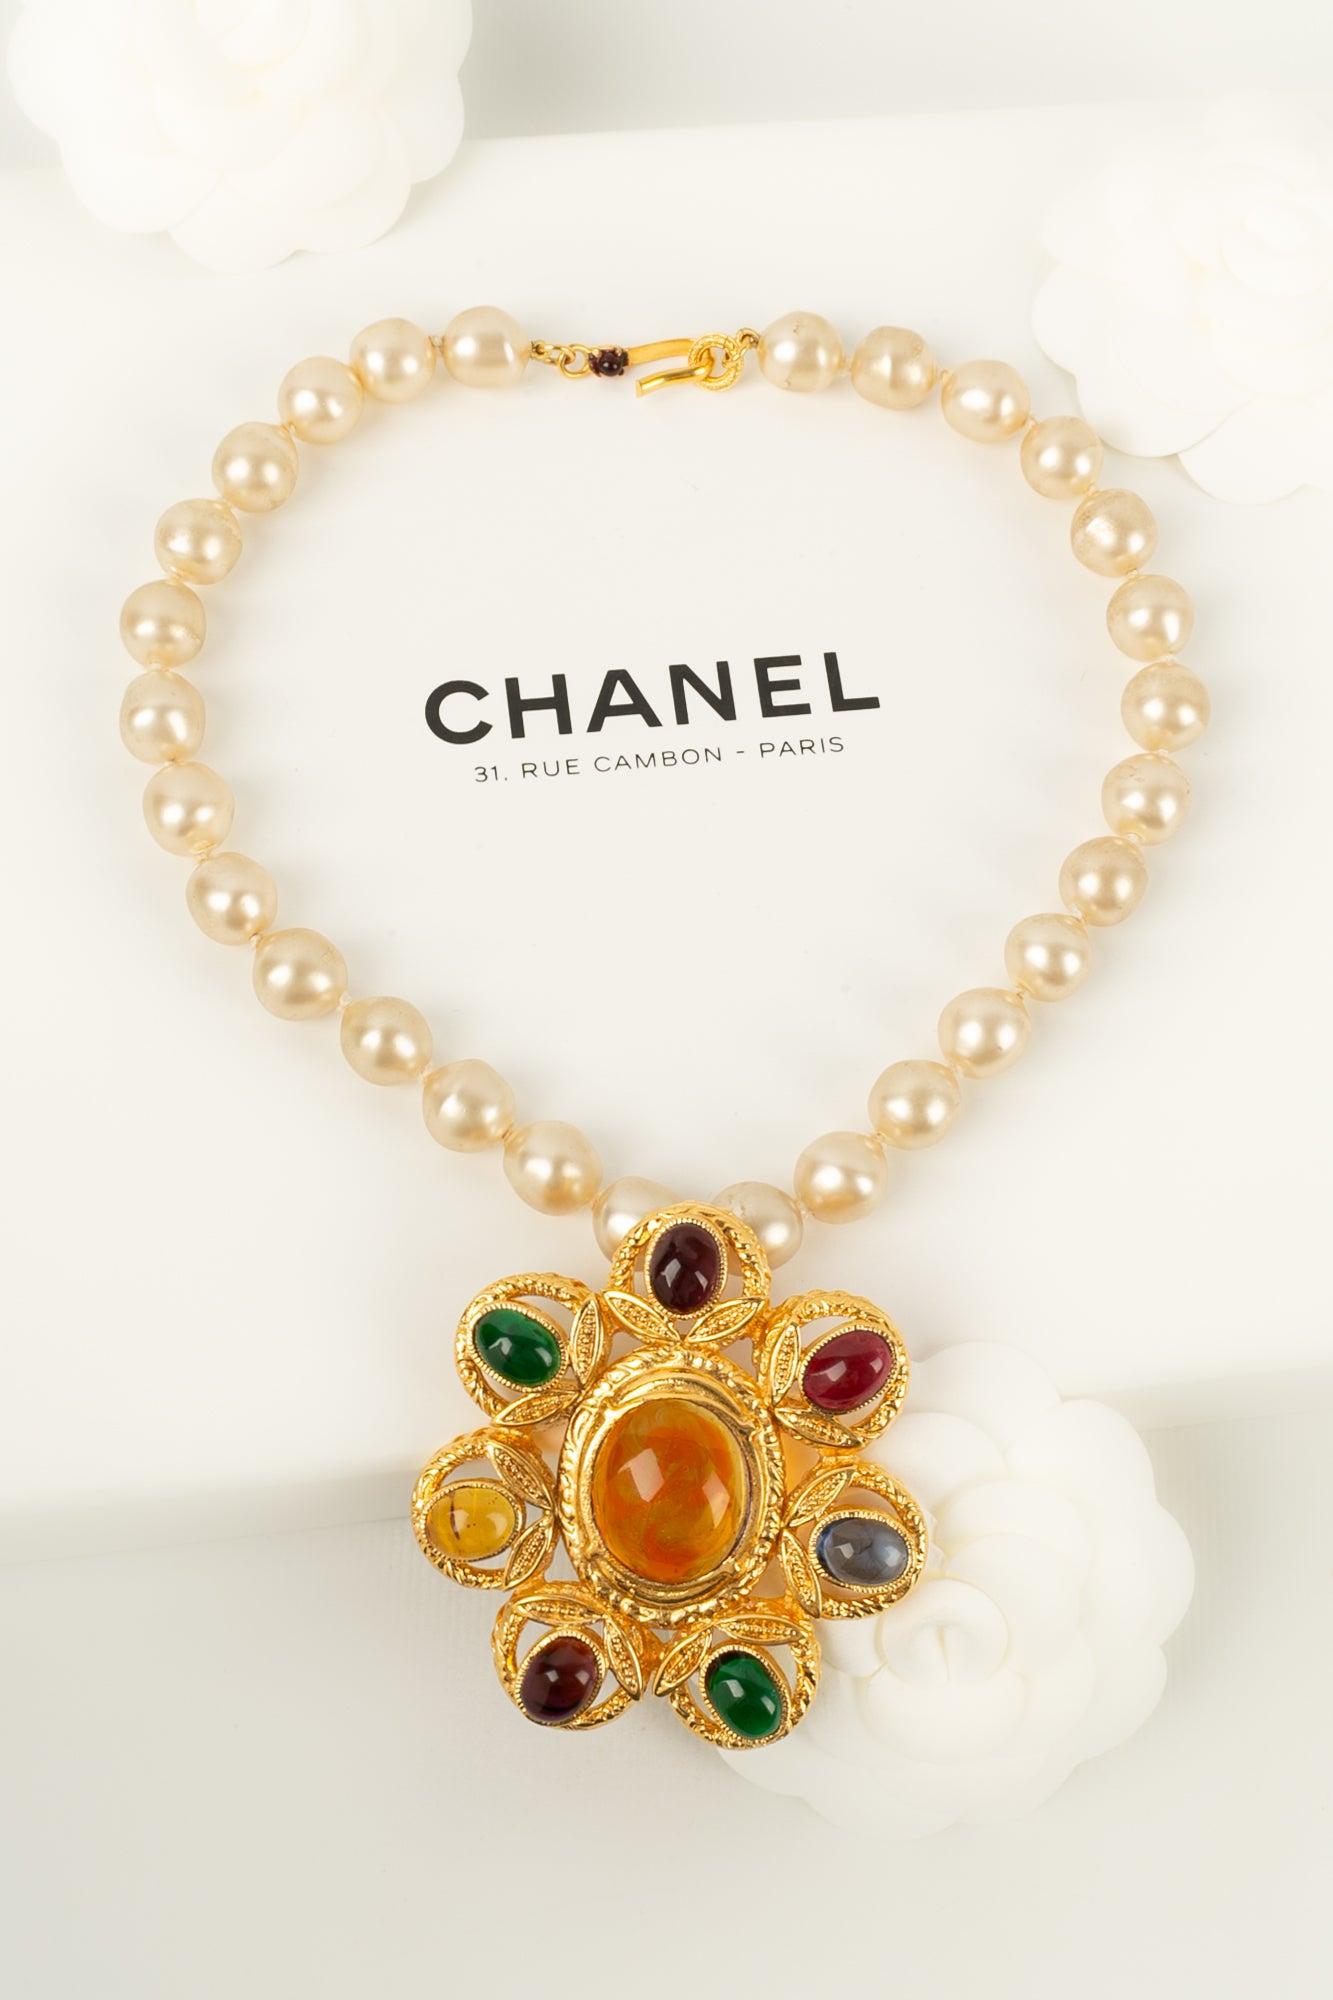 Chanel Necklace in Pearly Beads with A Medallion, 1996 For Sale 5